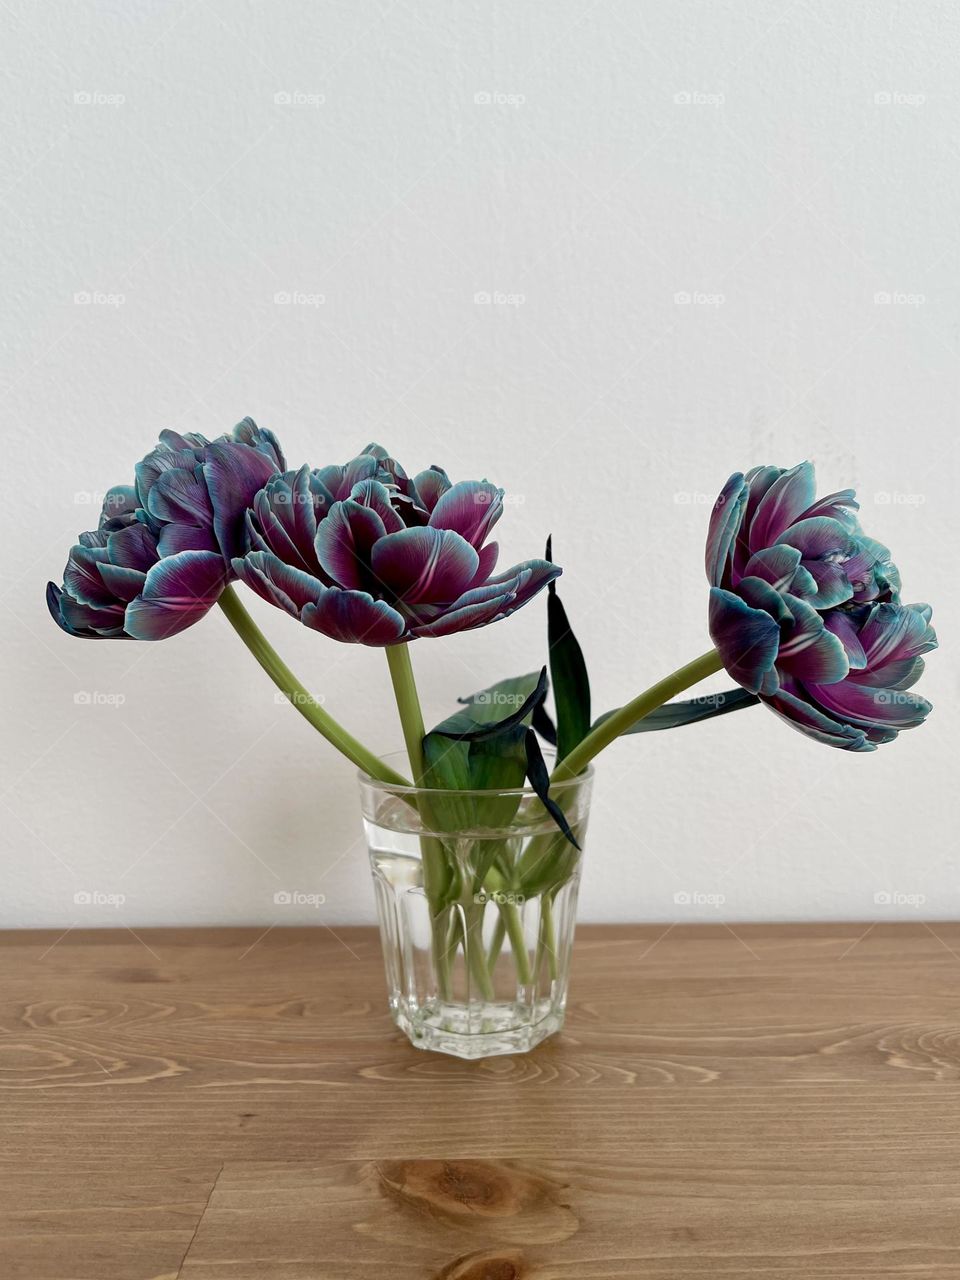 Blue and purple tulips in the glass vase